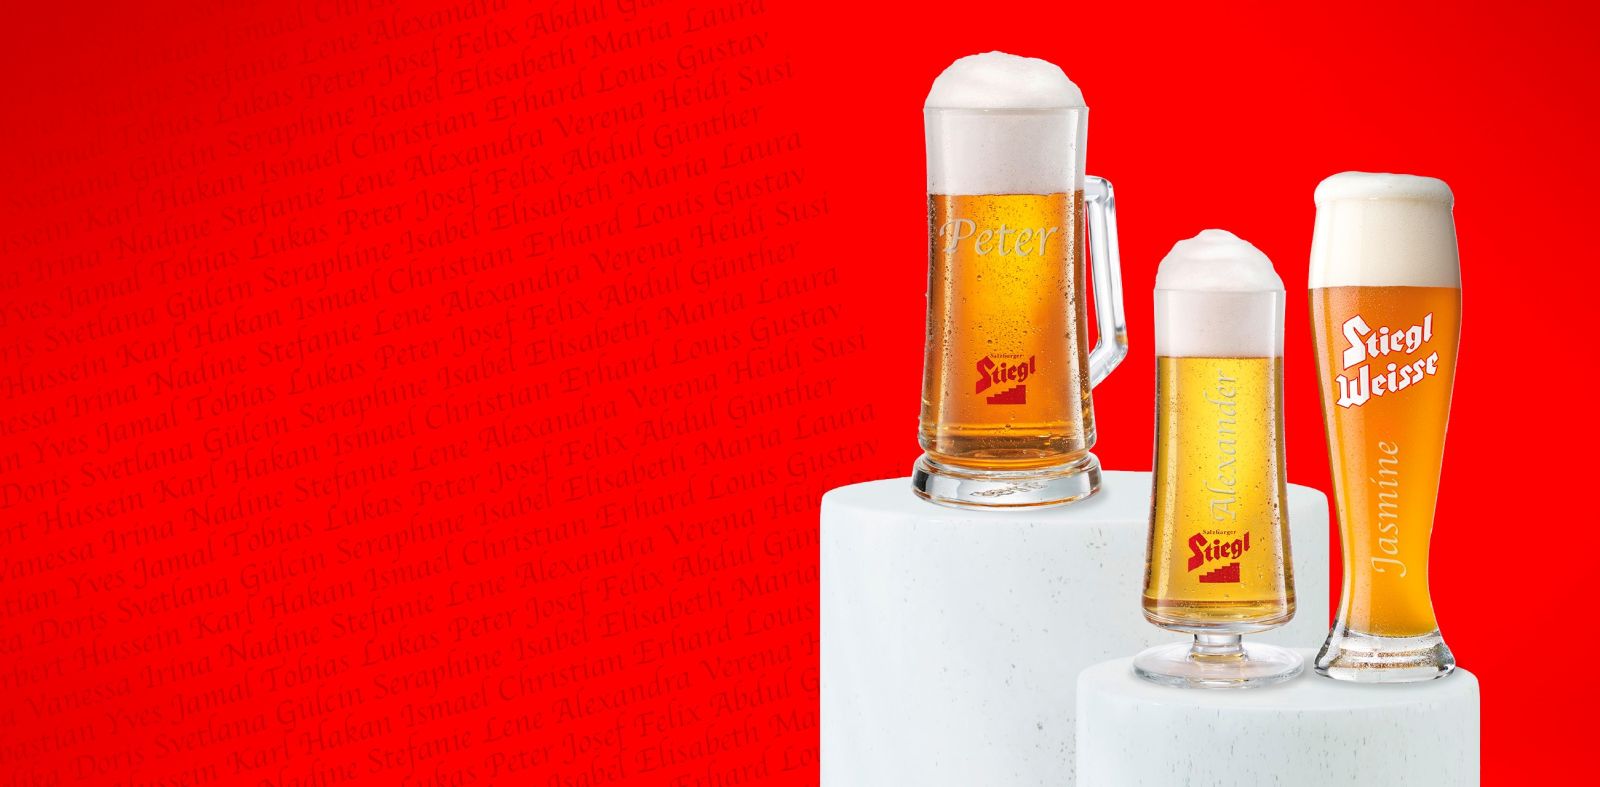 Welcome to the wonderful World of Stiegl